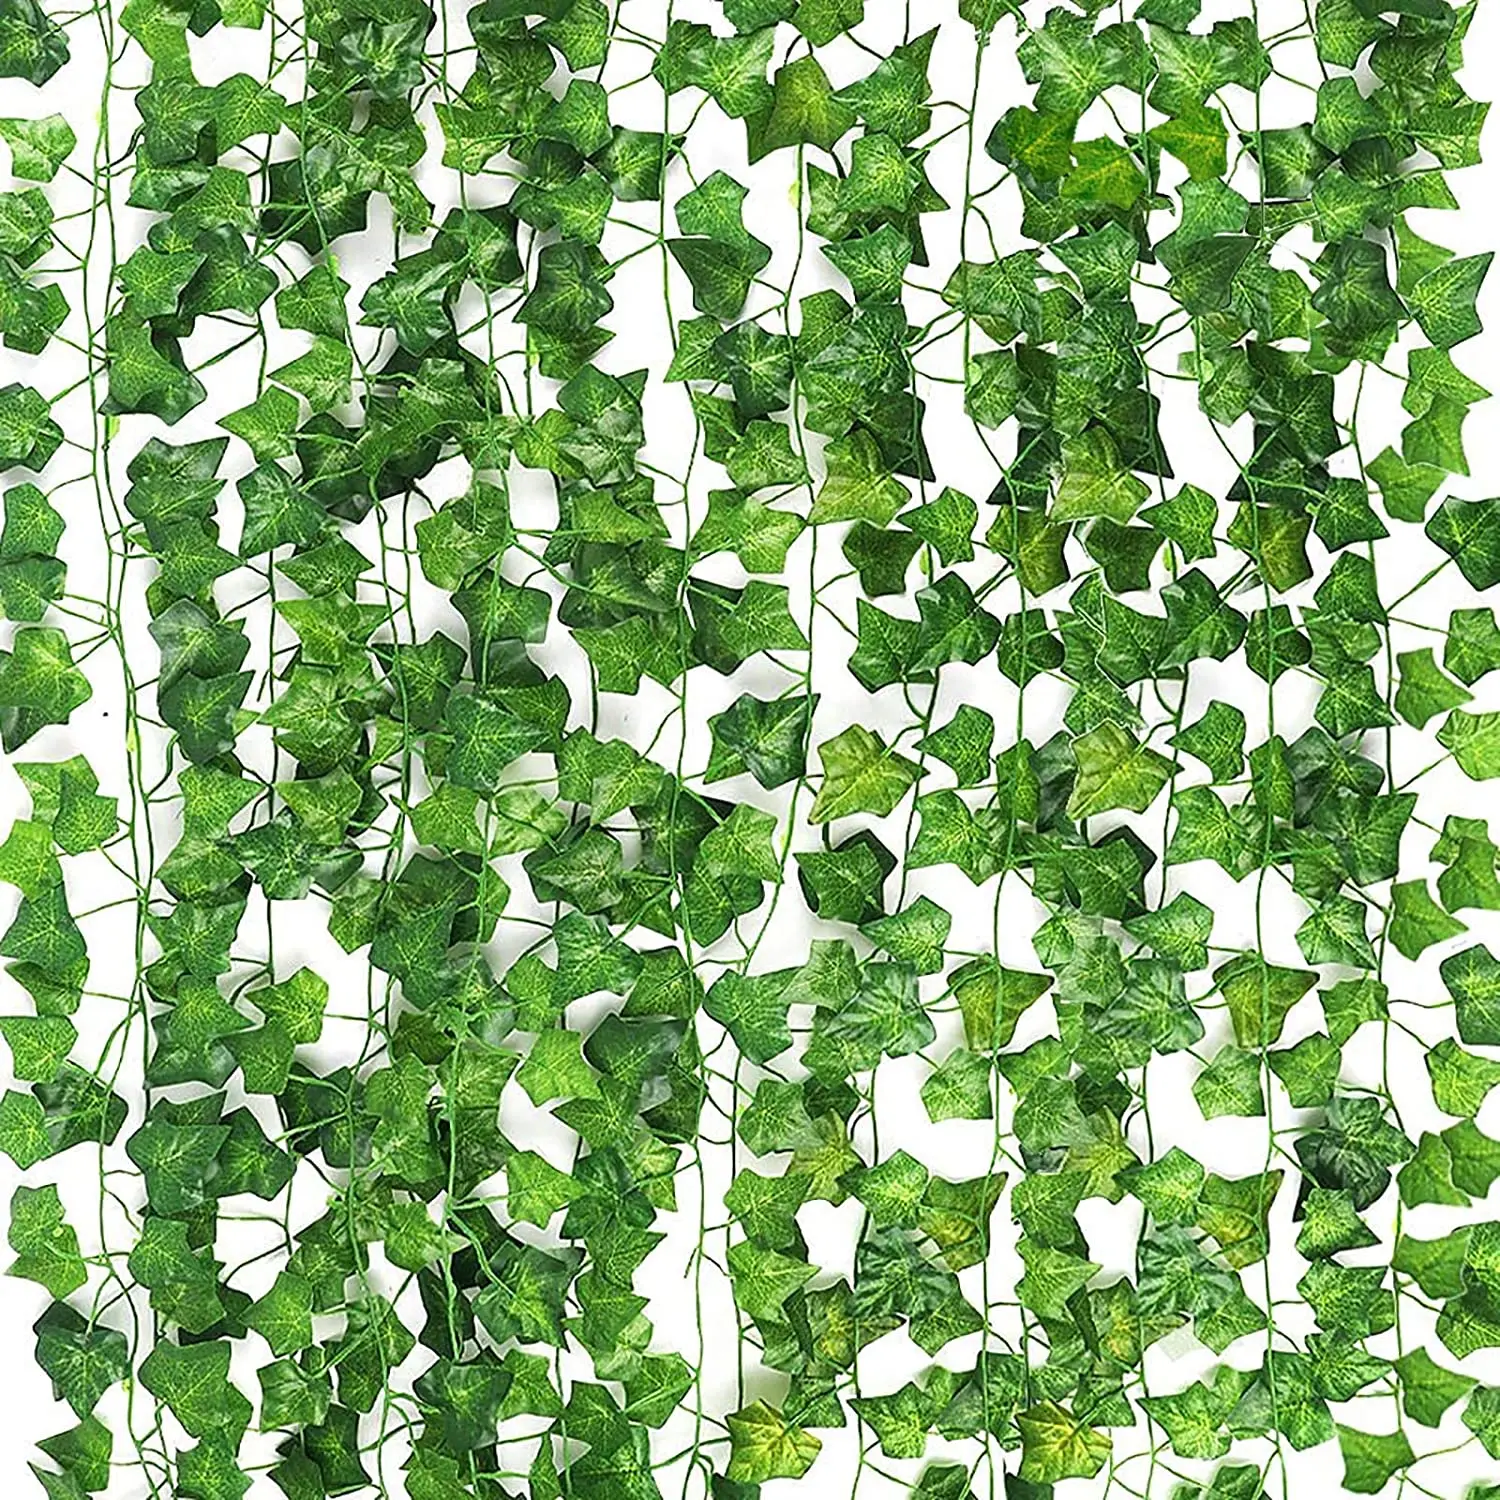 6.5FT Fake Ivy Leaves Artificial Ivy Garland Greenery Garlands Hanging Plant Vine for Wedding Wall Party Room Aircondition Decor